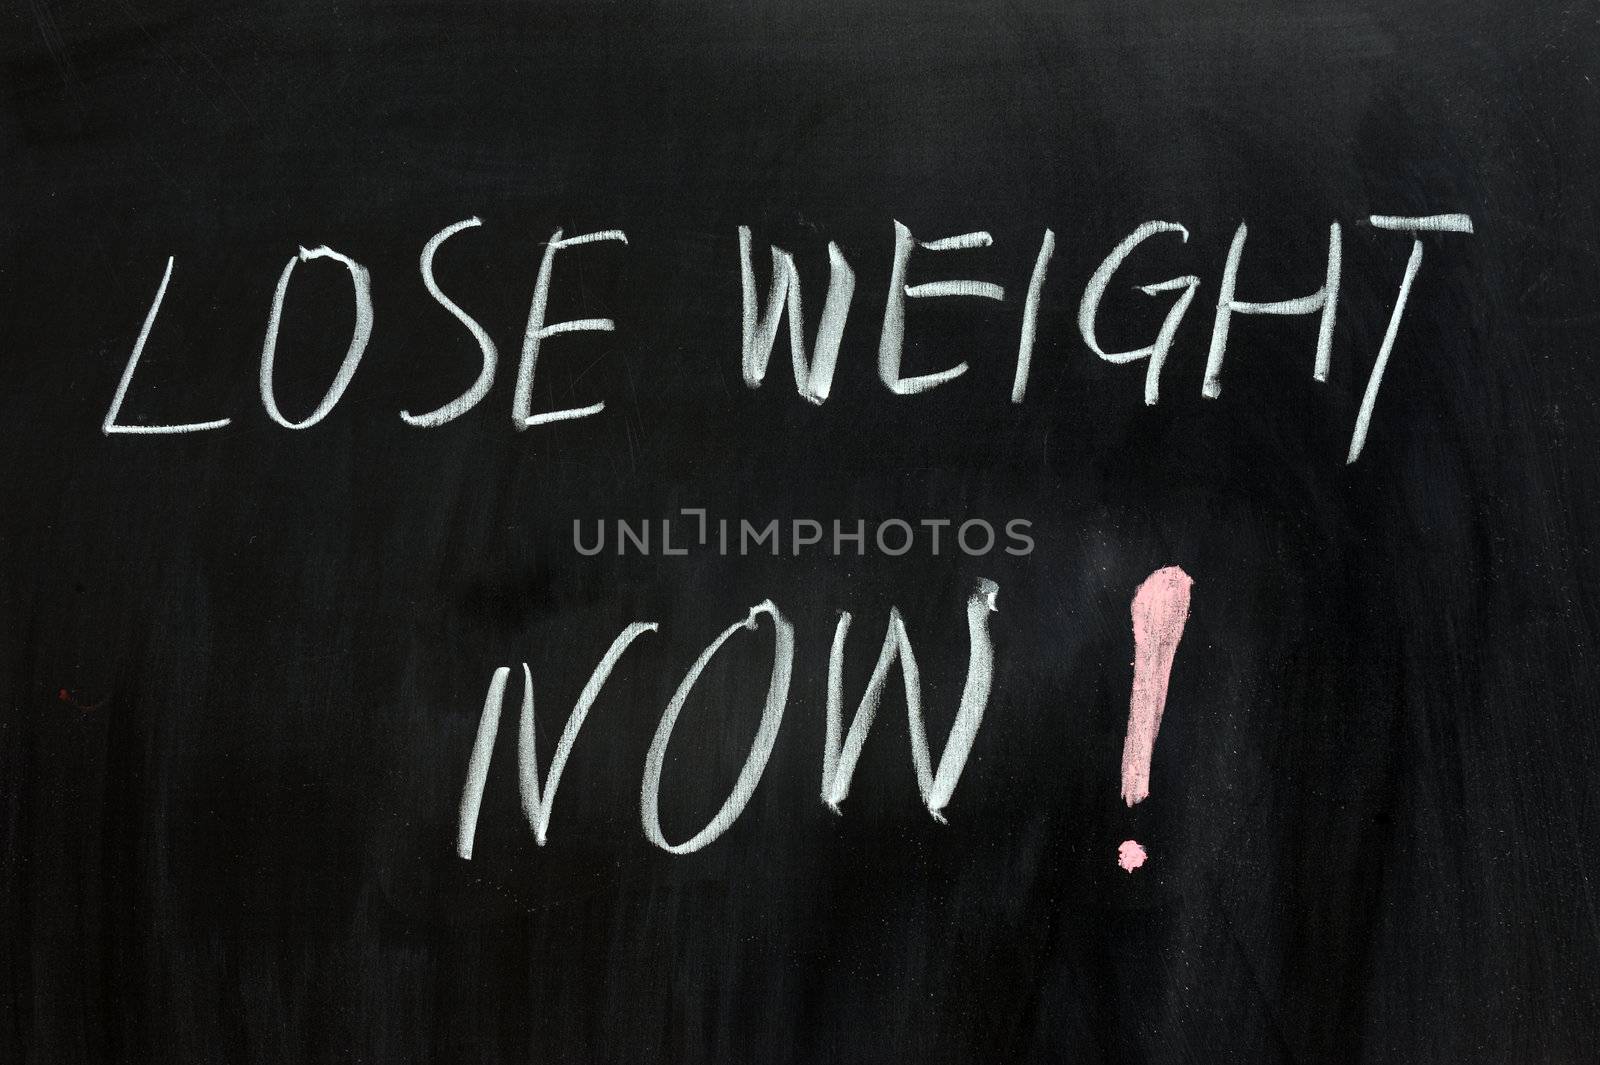 Chalk drawing - Lose weight now